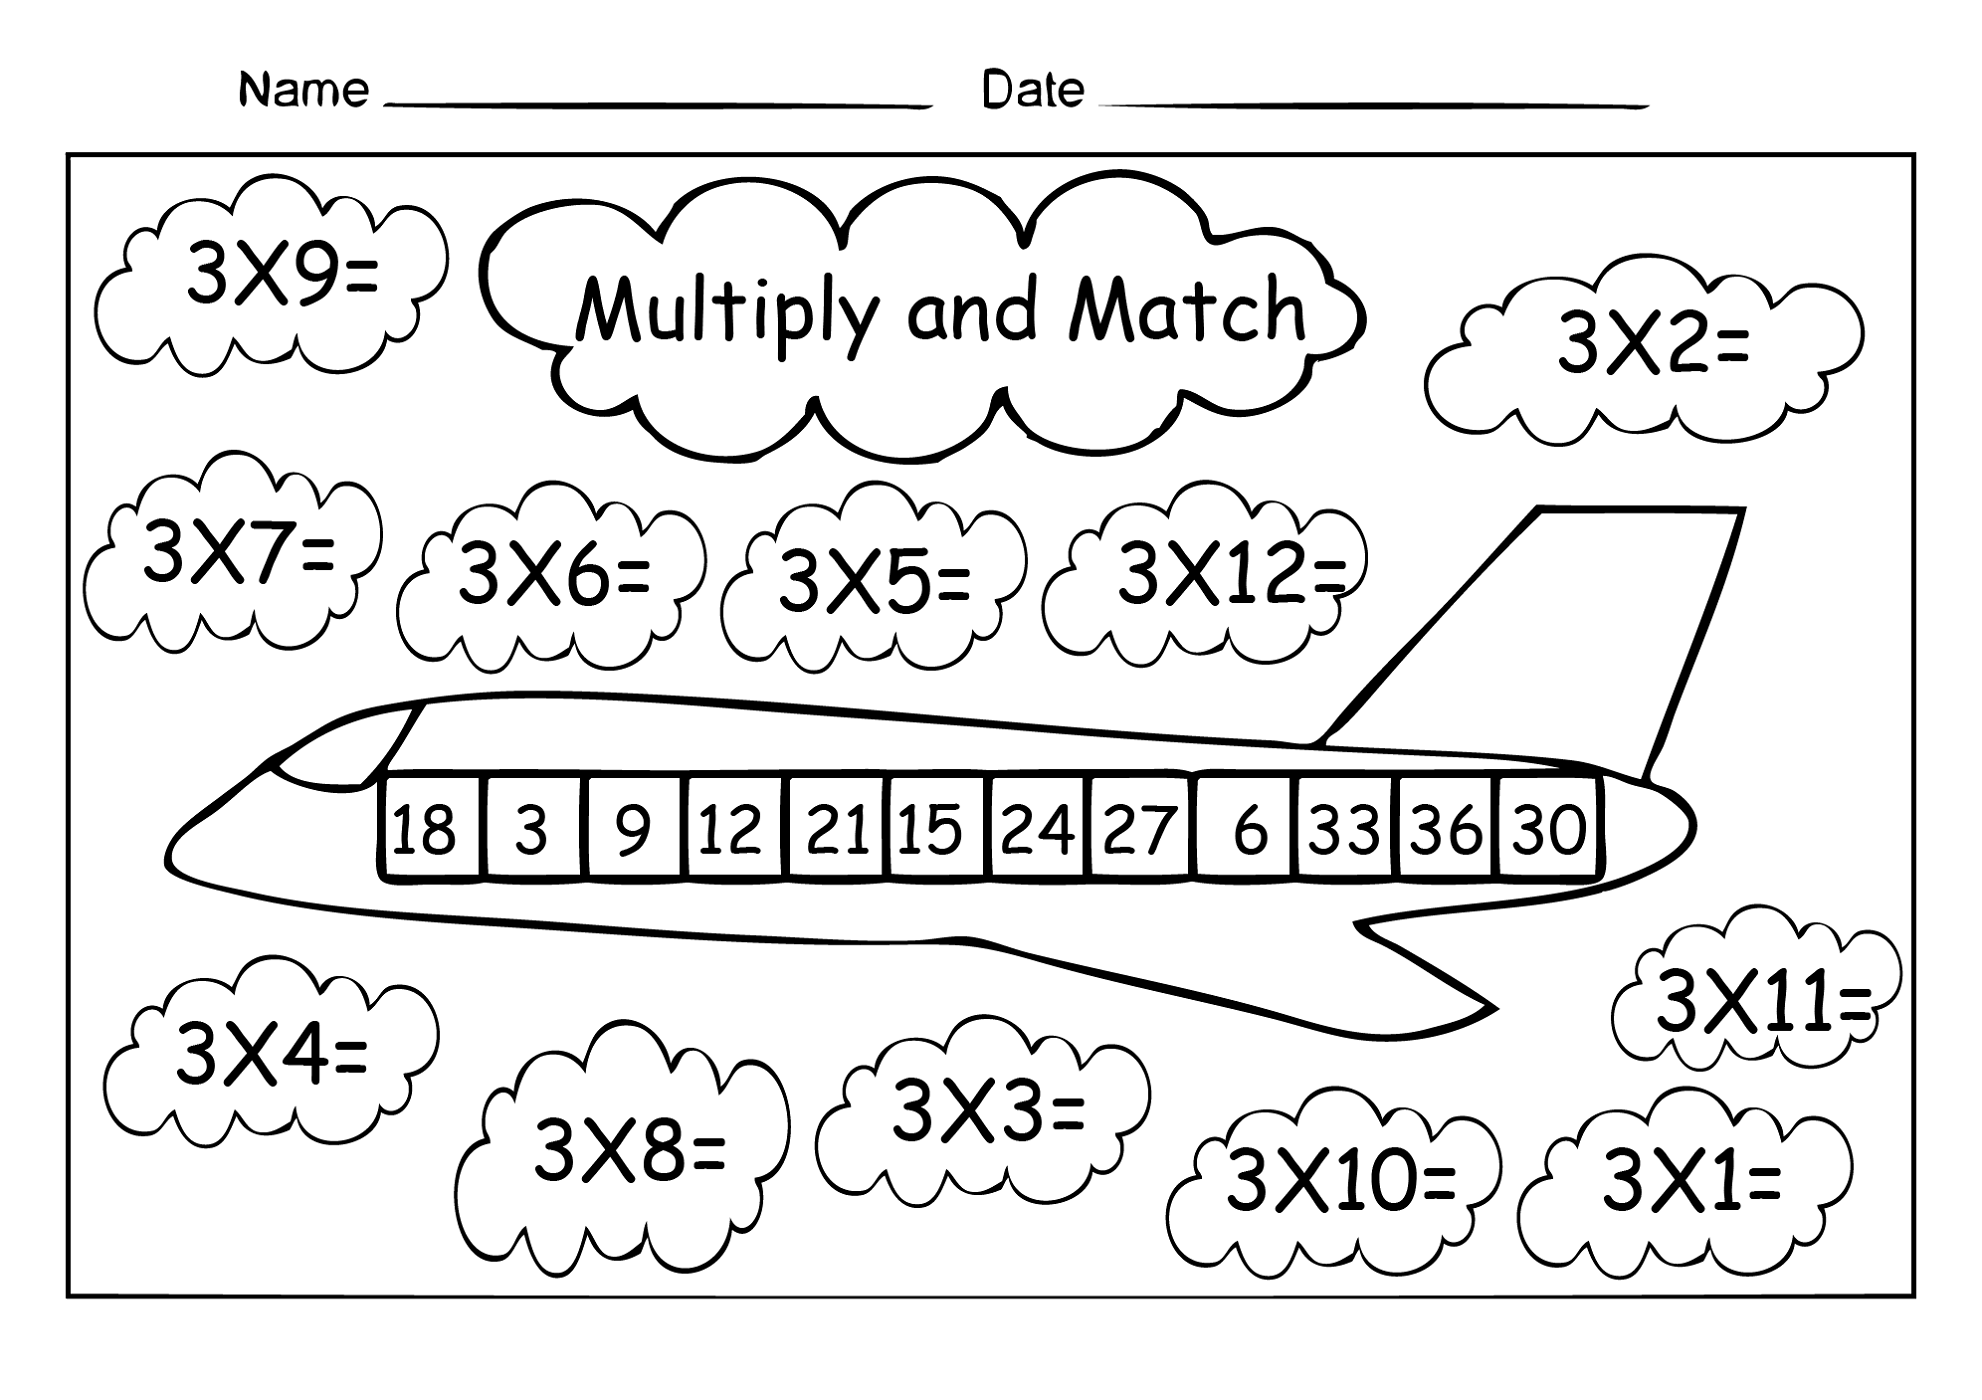 3 times tables worksheets matching